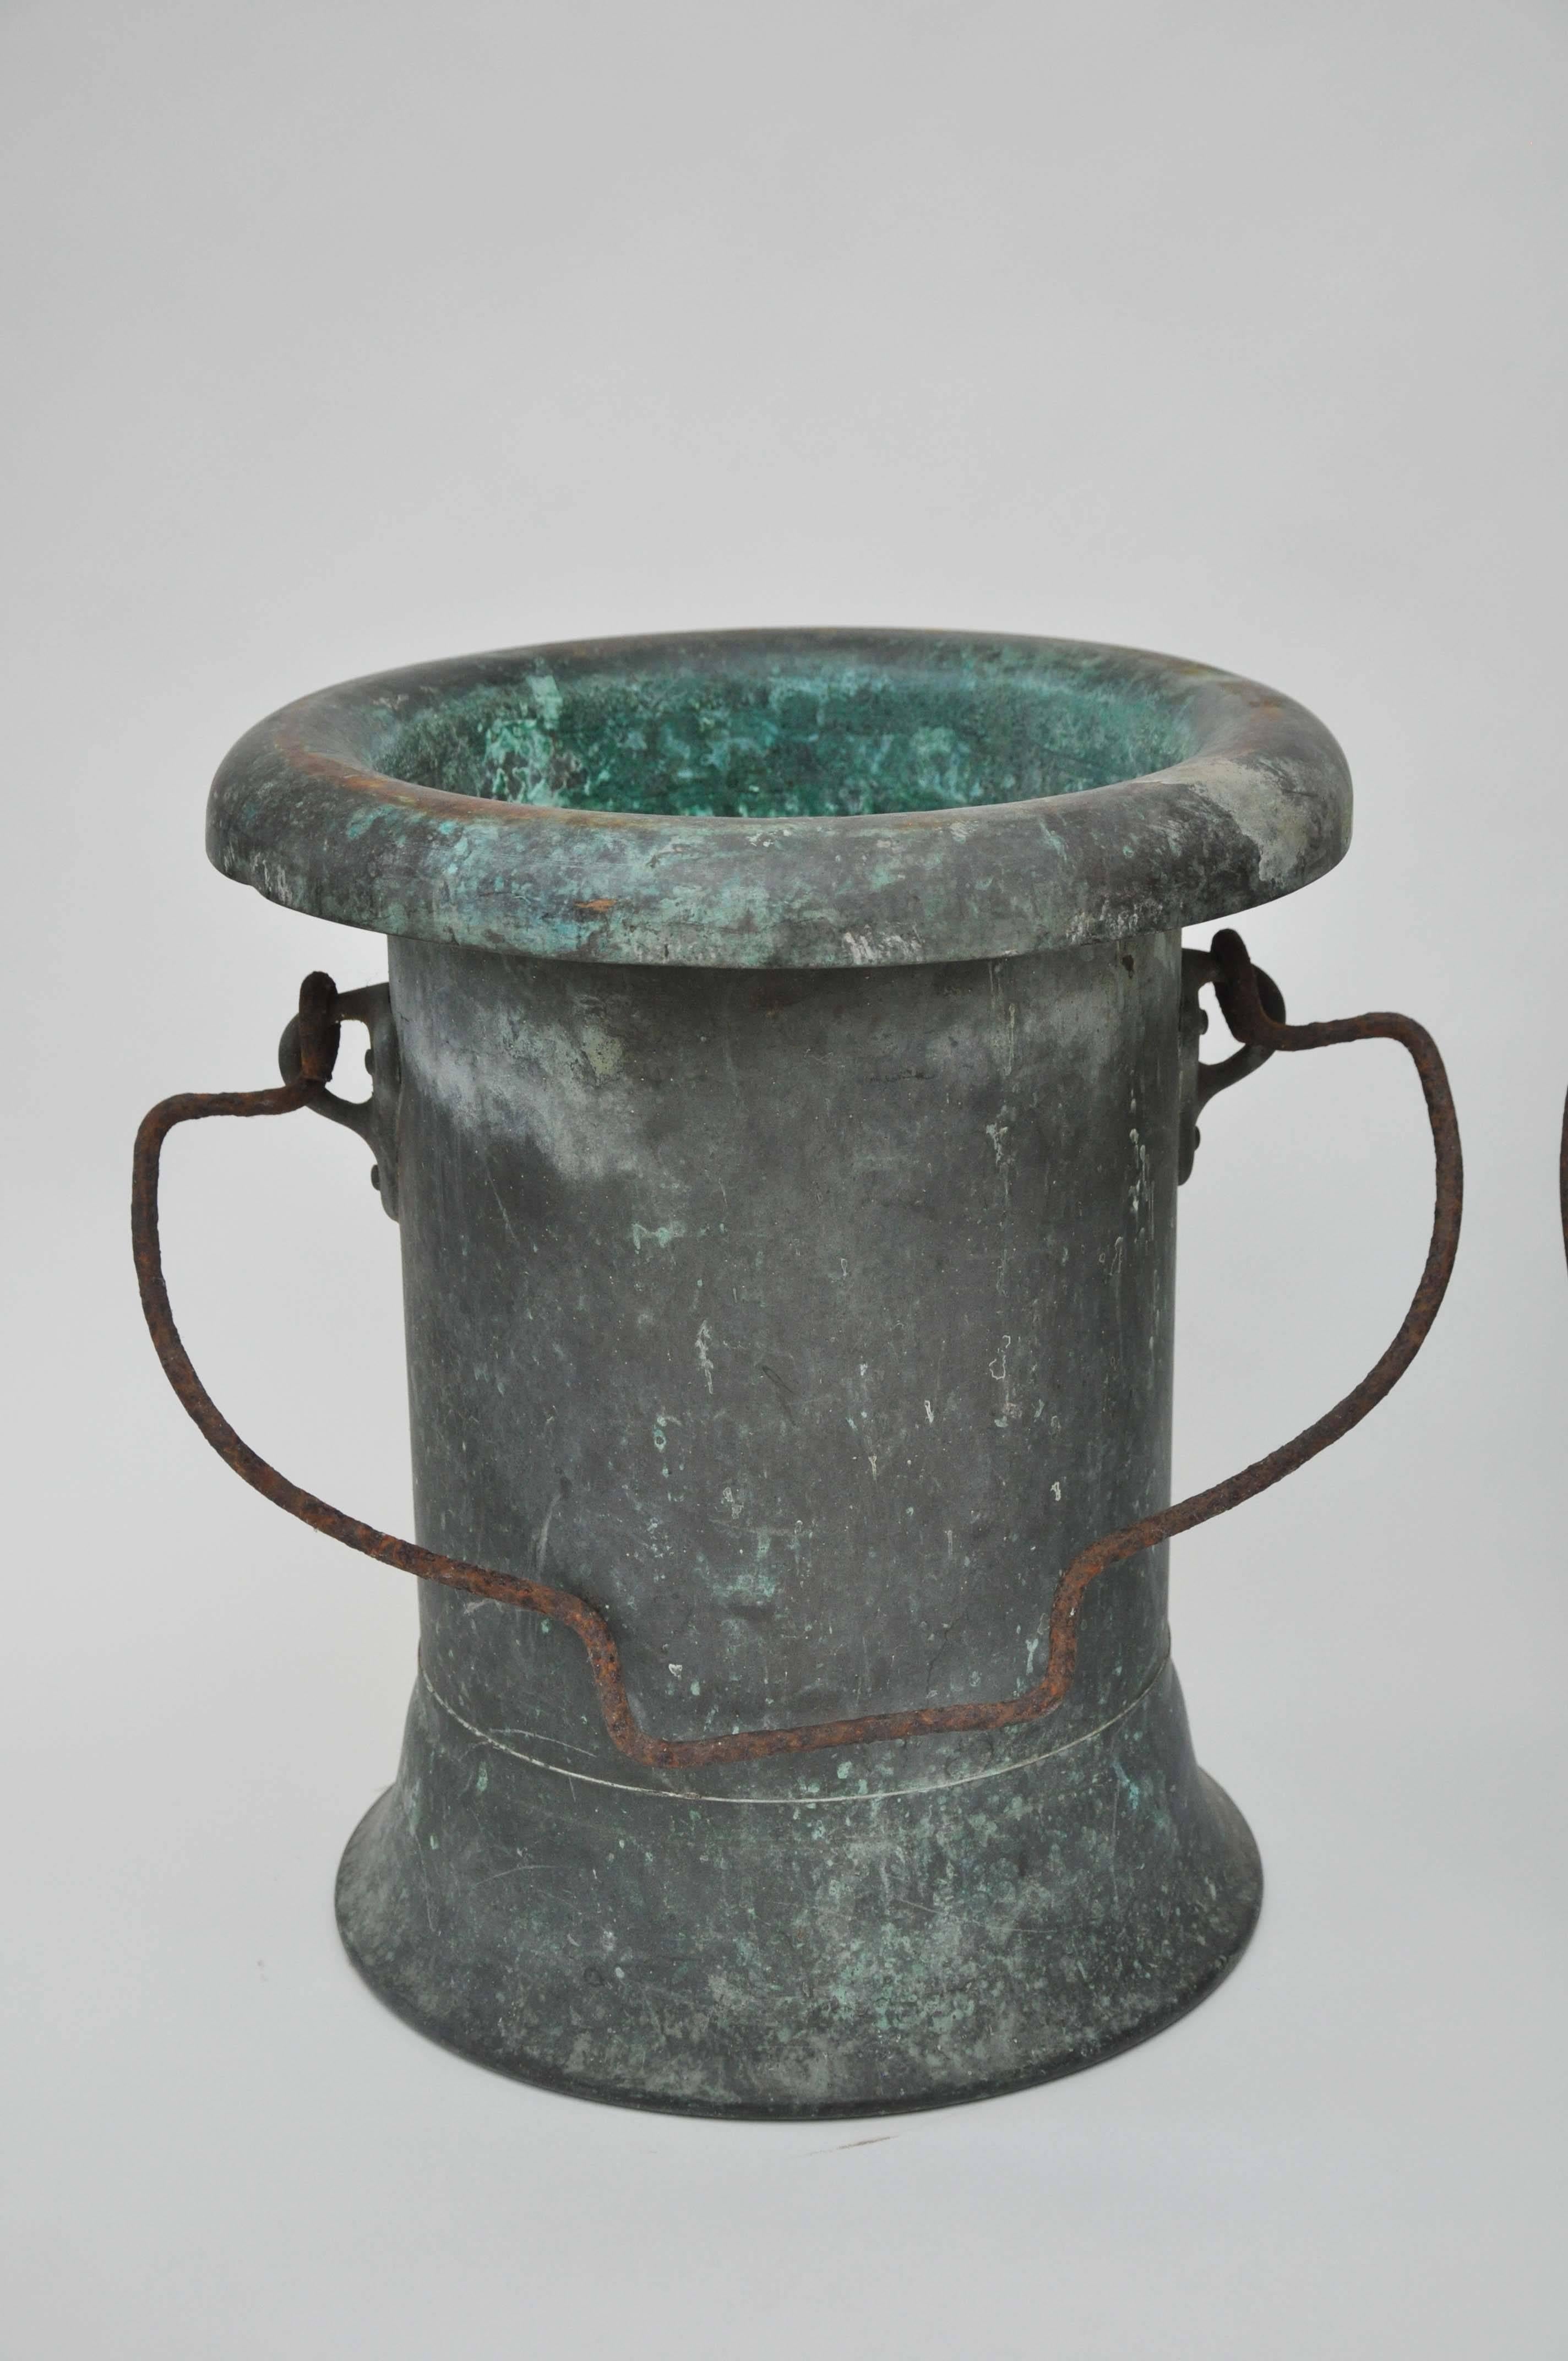 19th century Pair of verdigris vessels. Found in France. Copper construction with iron handles. Fabulous weathered verdigris finish. Handles measure 15